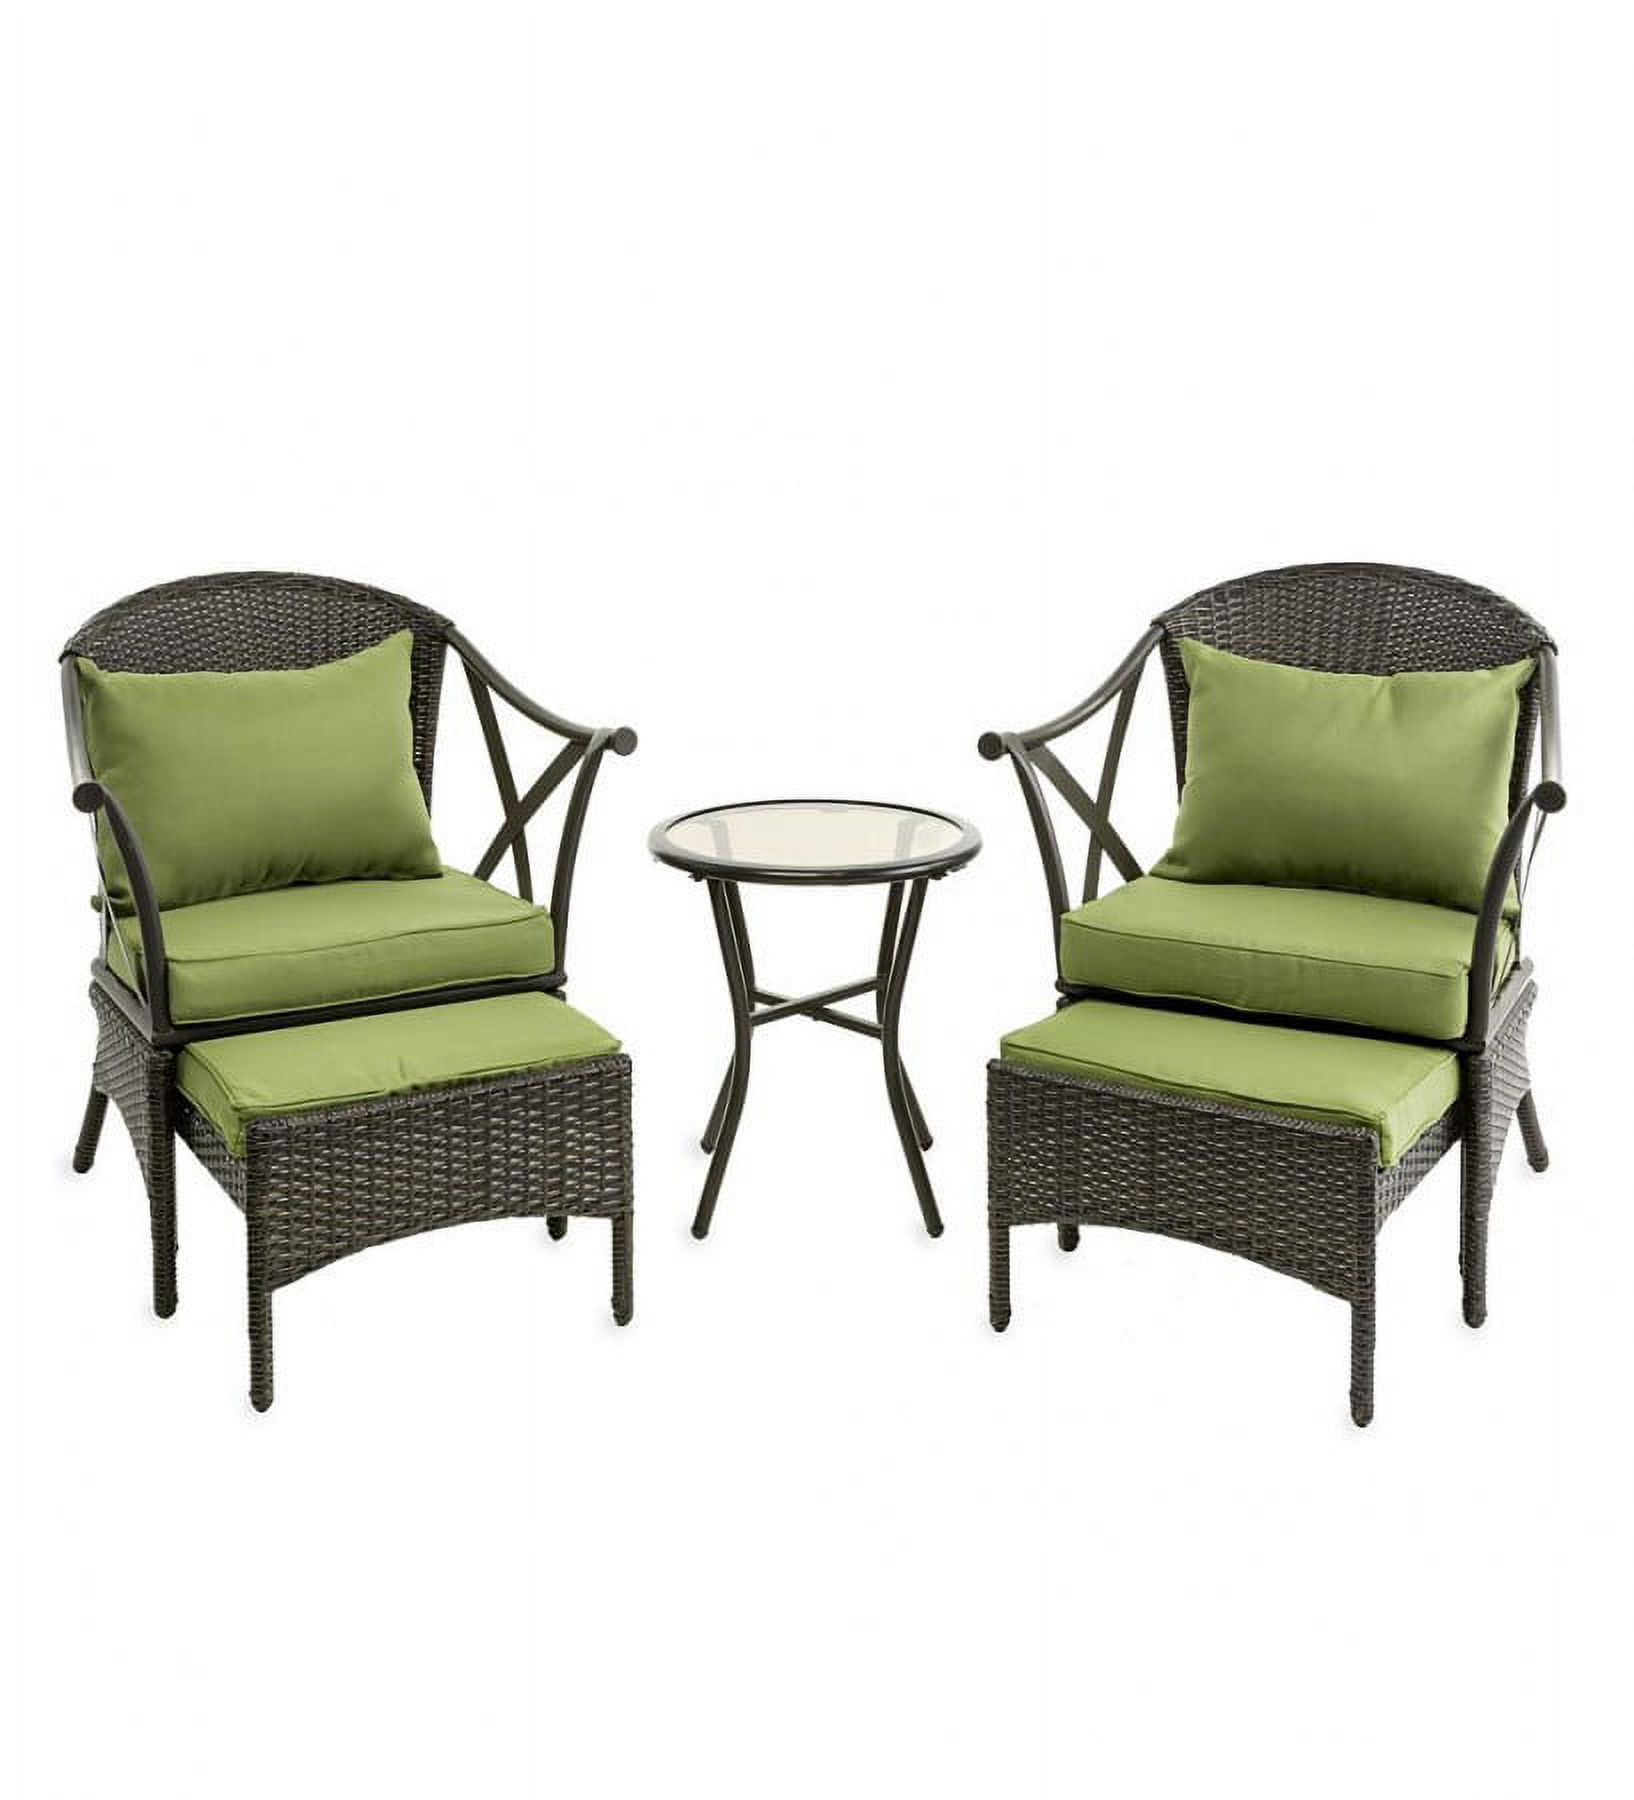 Plow & Hearth Wicker Patio Furniture Set with Cushions - image 1 of 1